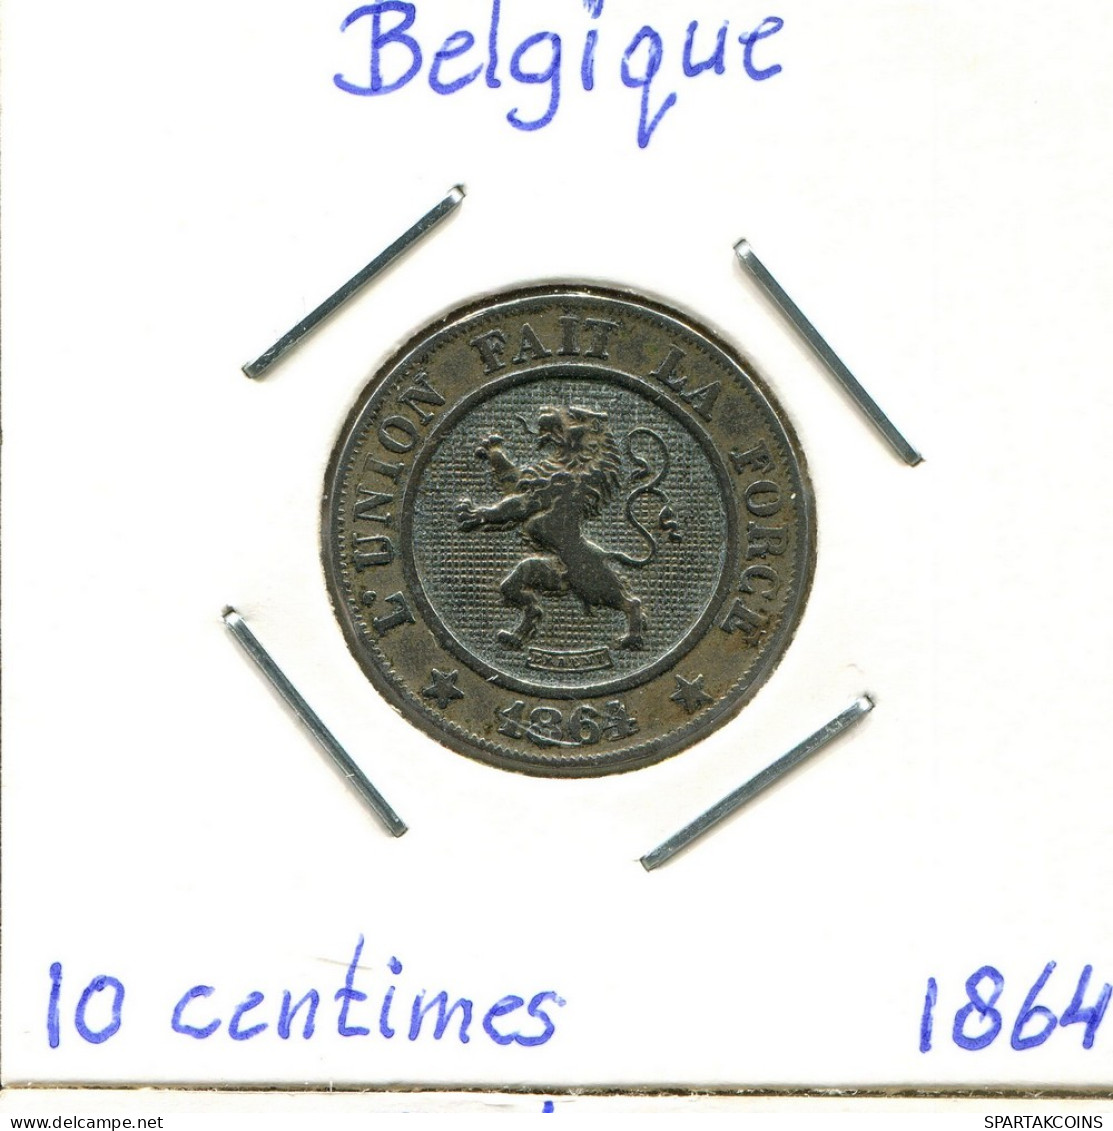 10 CENTIMES 1864 FRENCH Text BELGIUM Coin #BA270.U - 10 Cent